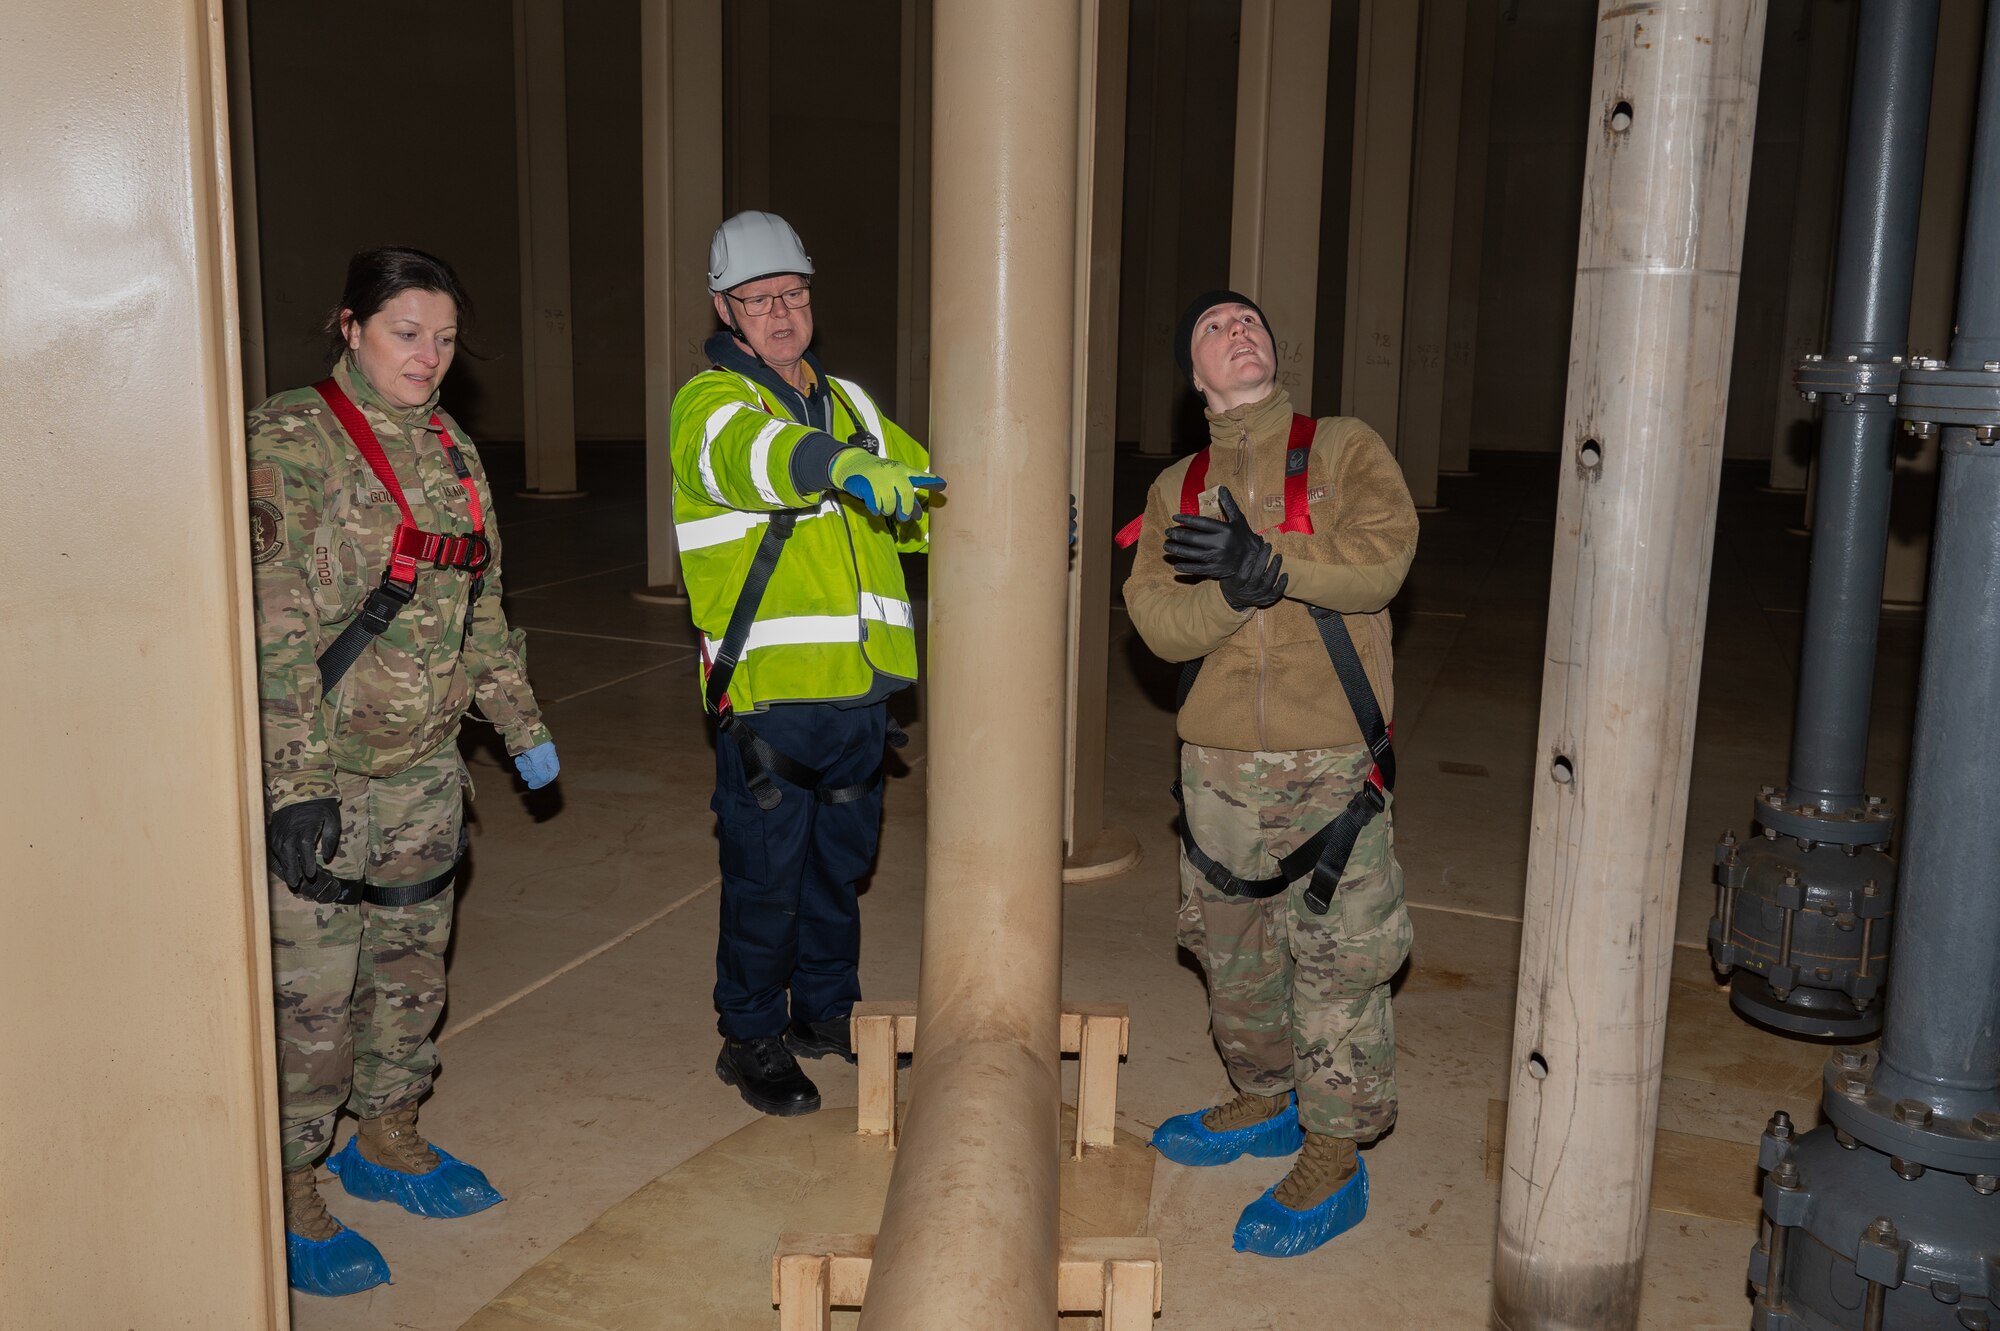 U.S. Air Force Tech. Sgt. Elizabeth Gould, left, 100th Logistics Readiness Squadron household goods NCO in charge, Senior Airman Austin Alvarado, right, 100th LRS fuels distribution operator, and Gladstone “Jock” Breckney, middle, Environmental Chemical Corporation project manager, talk in the center of the drained jet fuel storage tank, Feb. 28, 2023, at Royal Air Force Mildenhall, England.